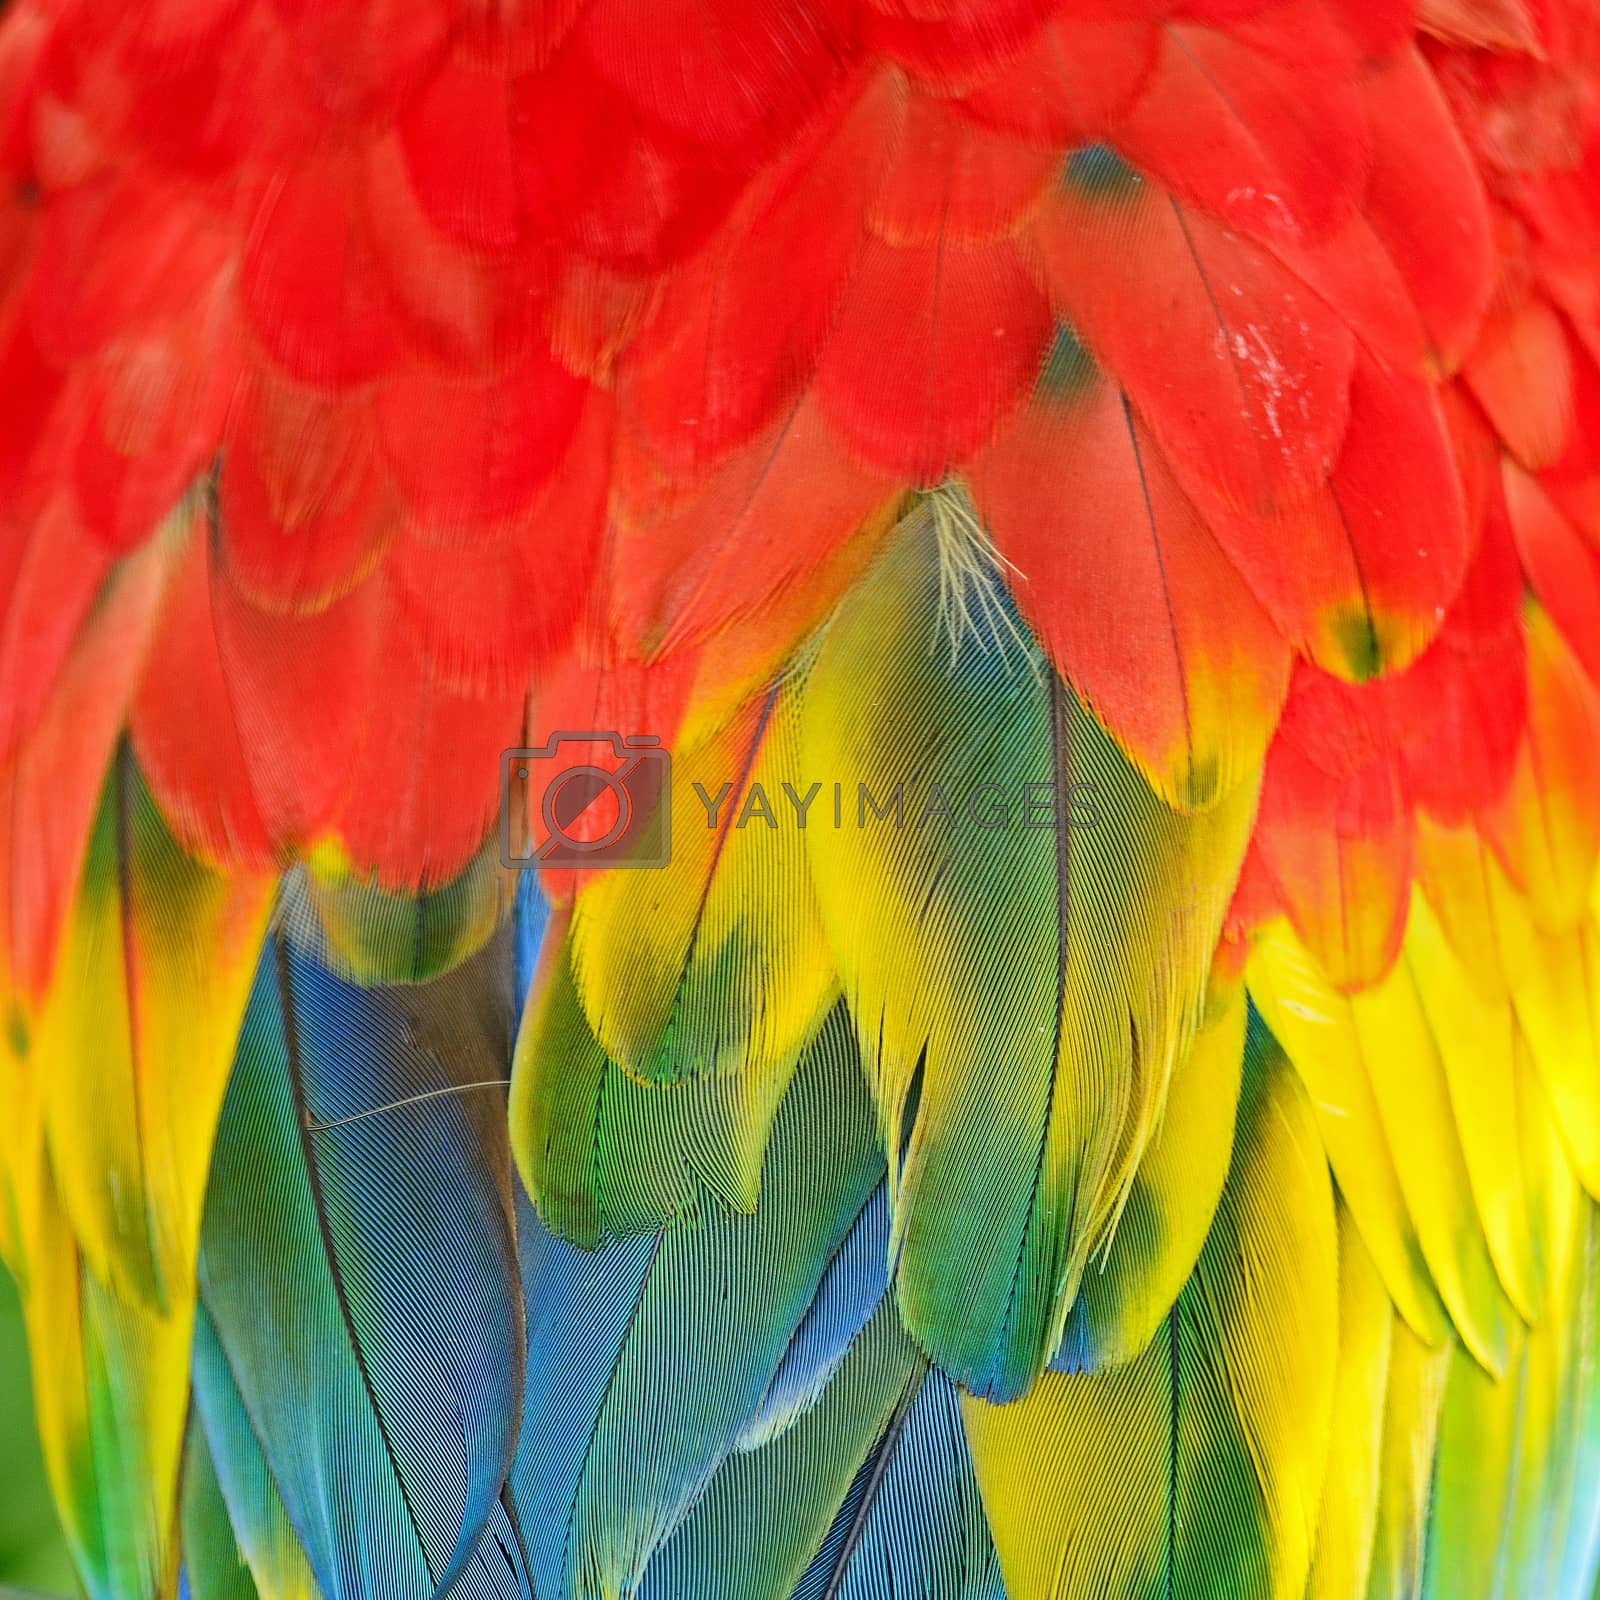 Royalty free image of Scarlet Macaw feathers by panuruangjan